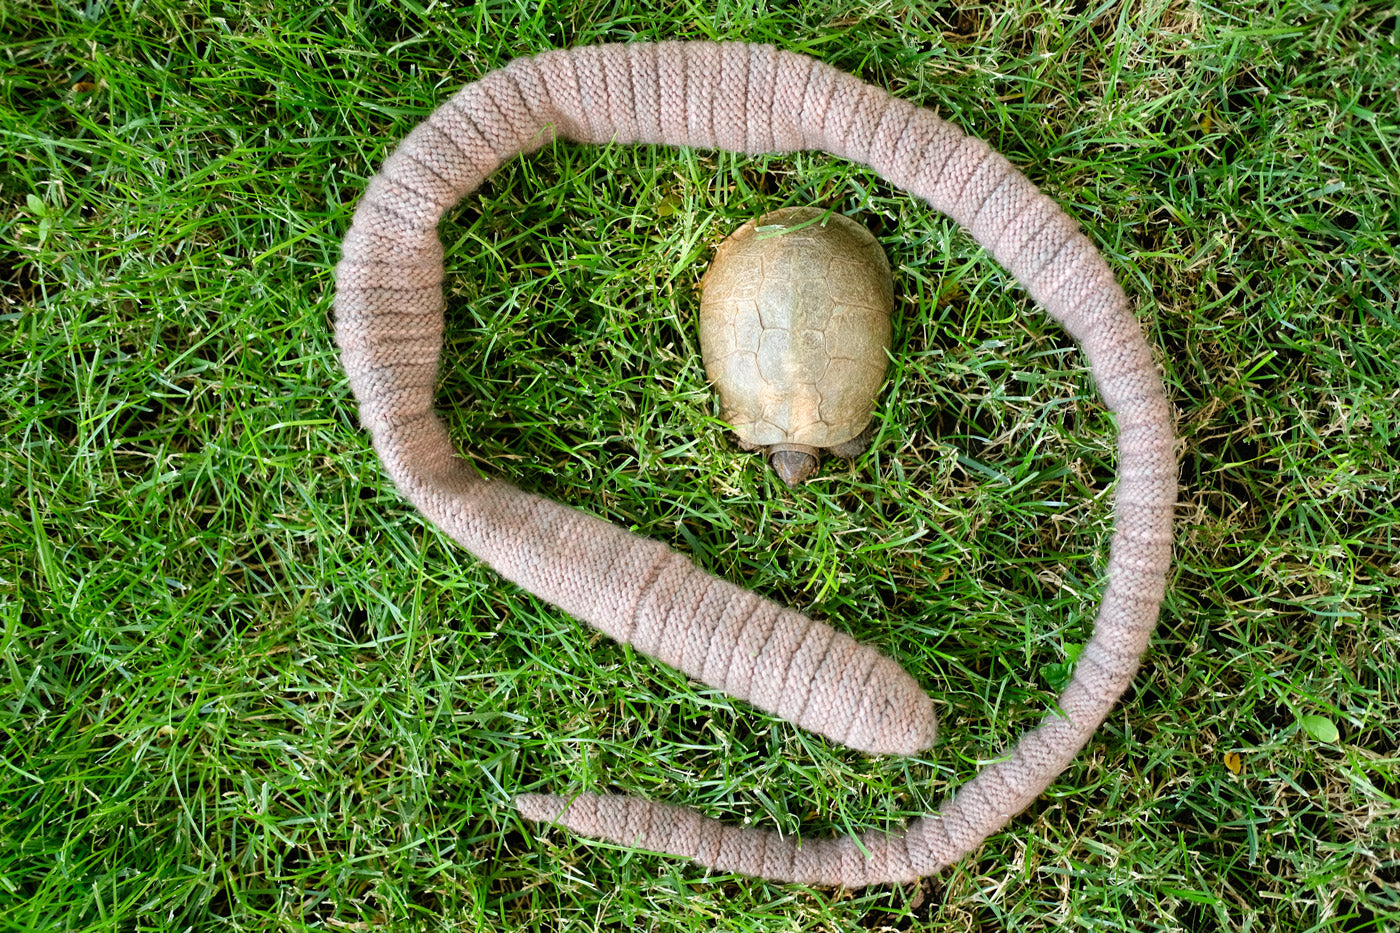 Knit your own Earthworm